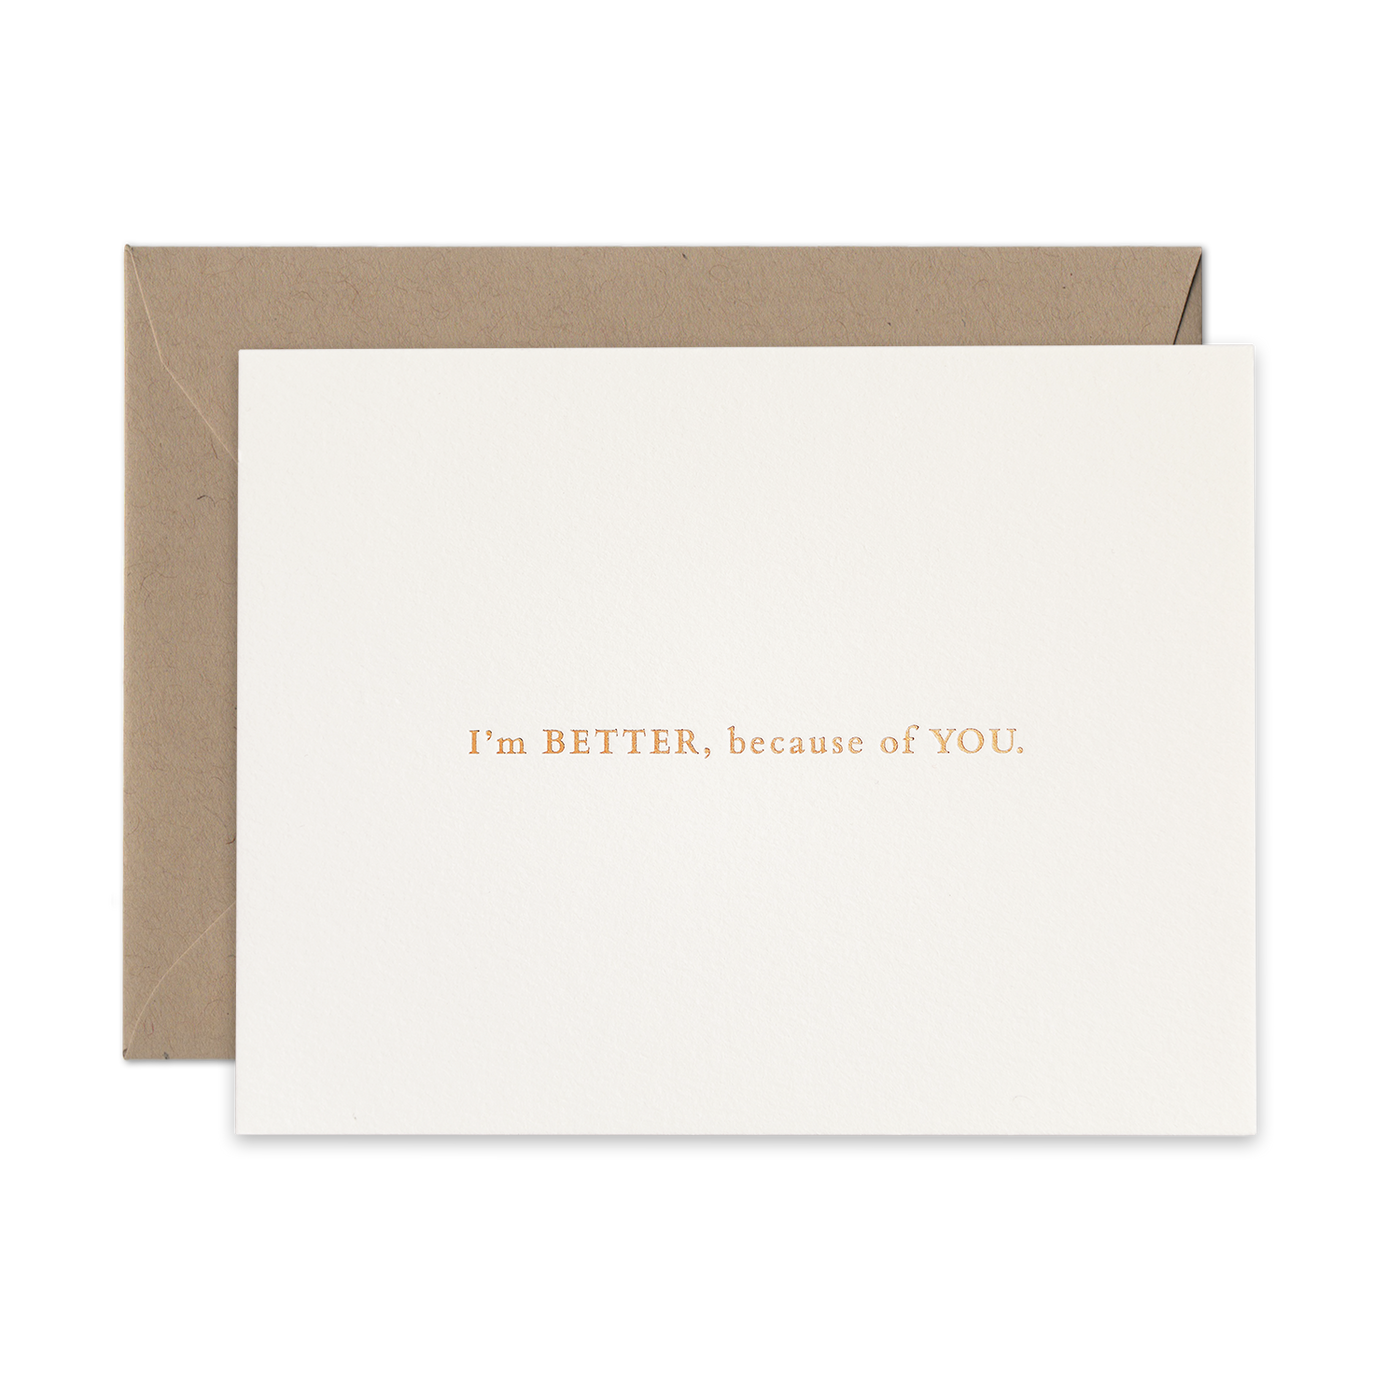 Gold foil letterpress greeting card by beknown. I'm better, because of you.